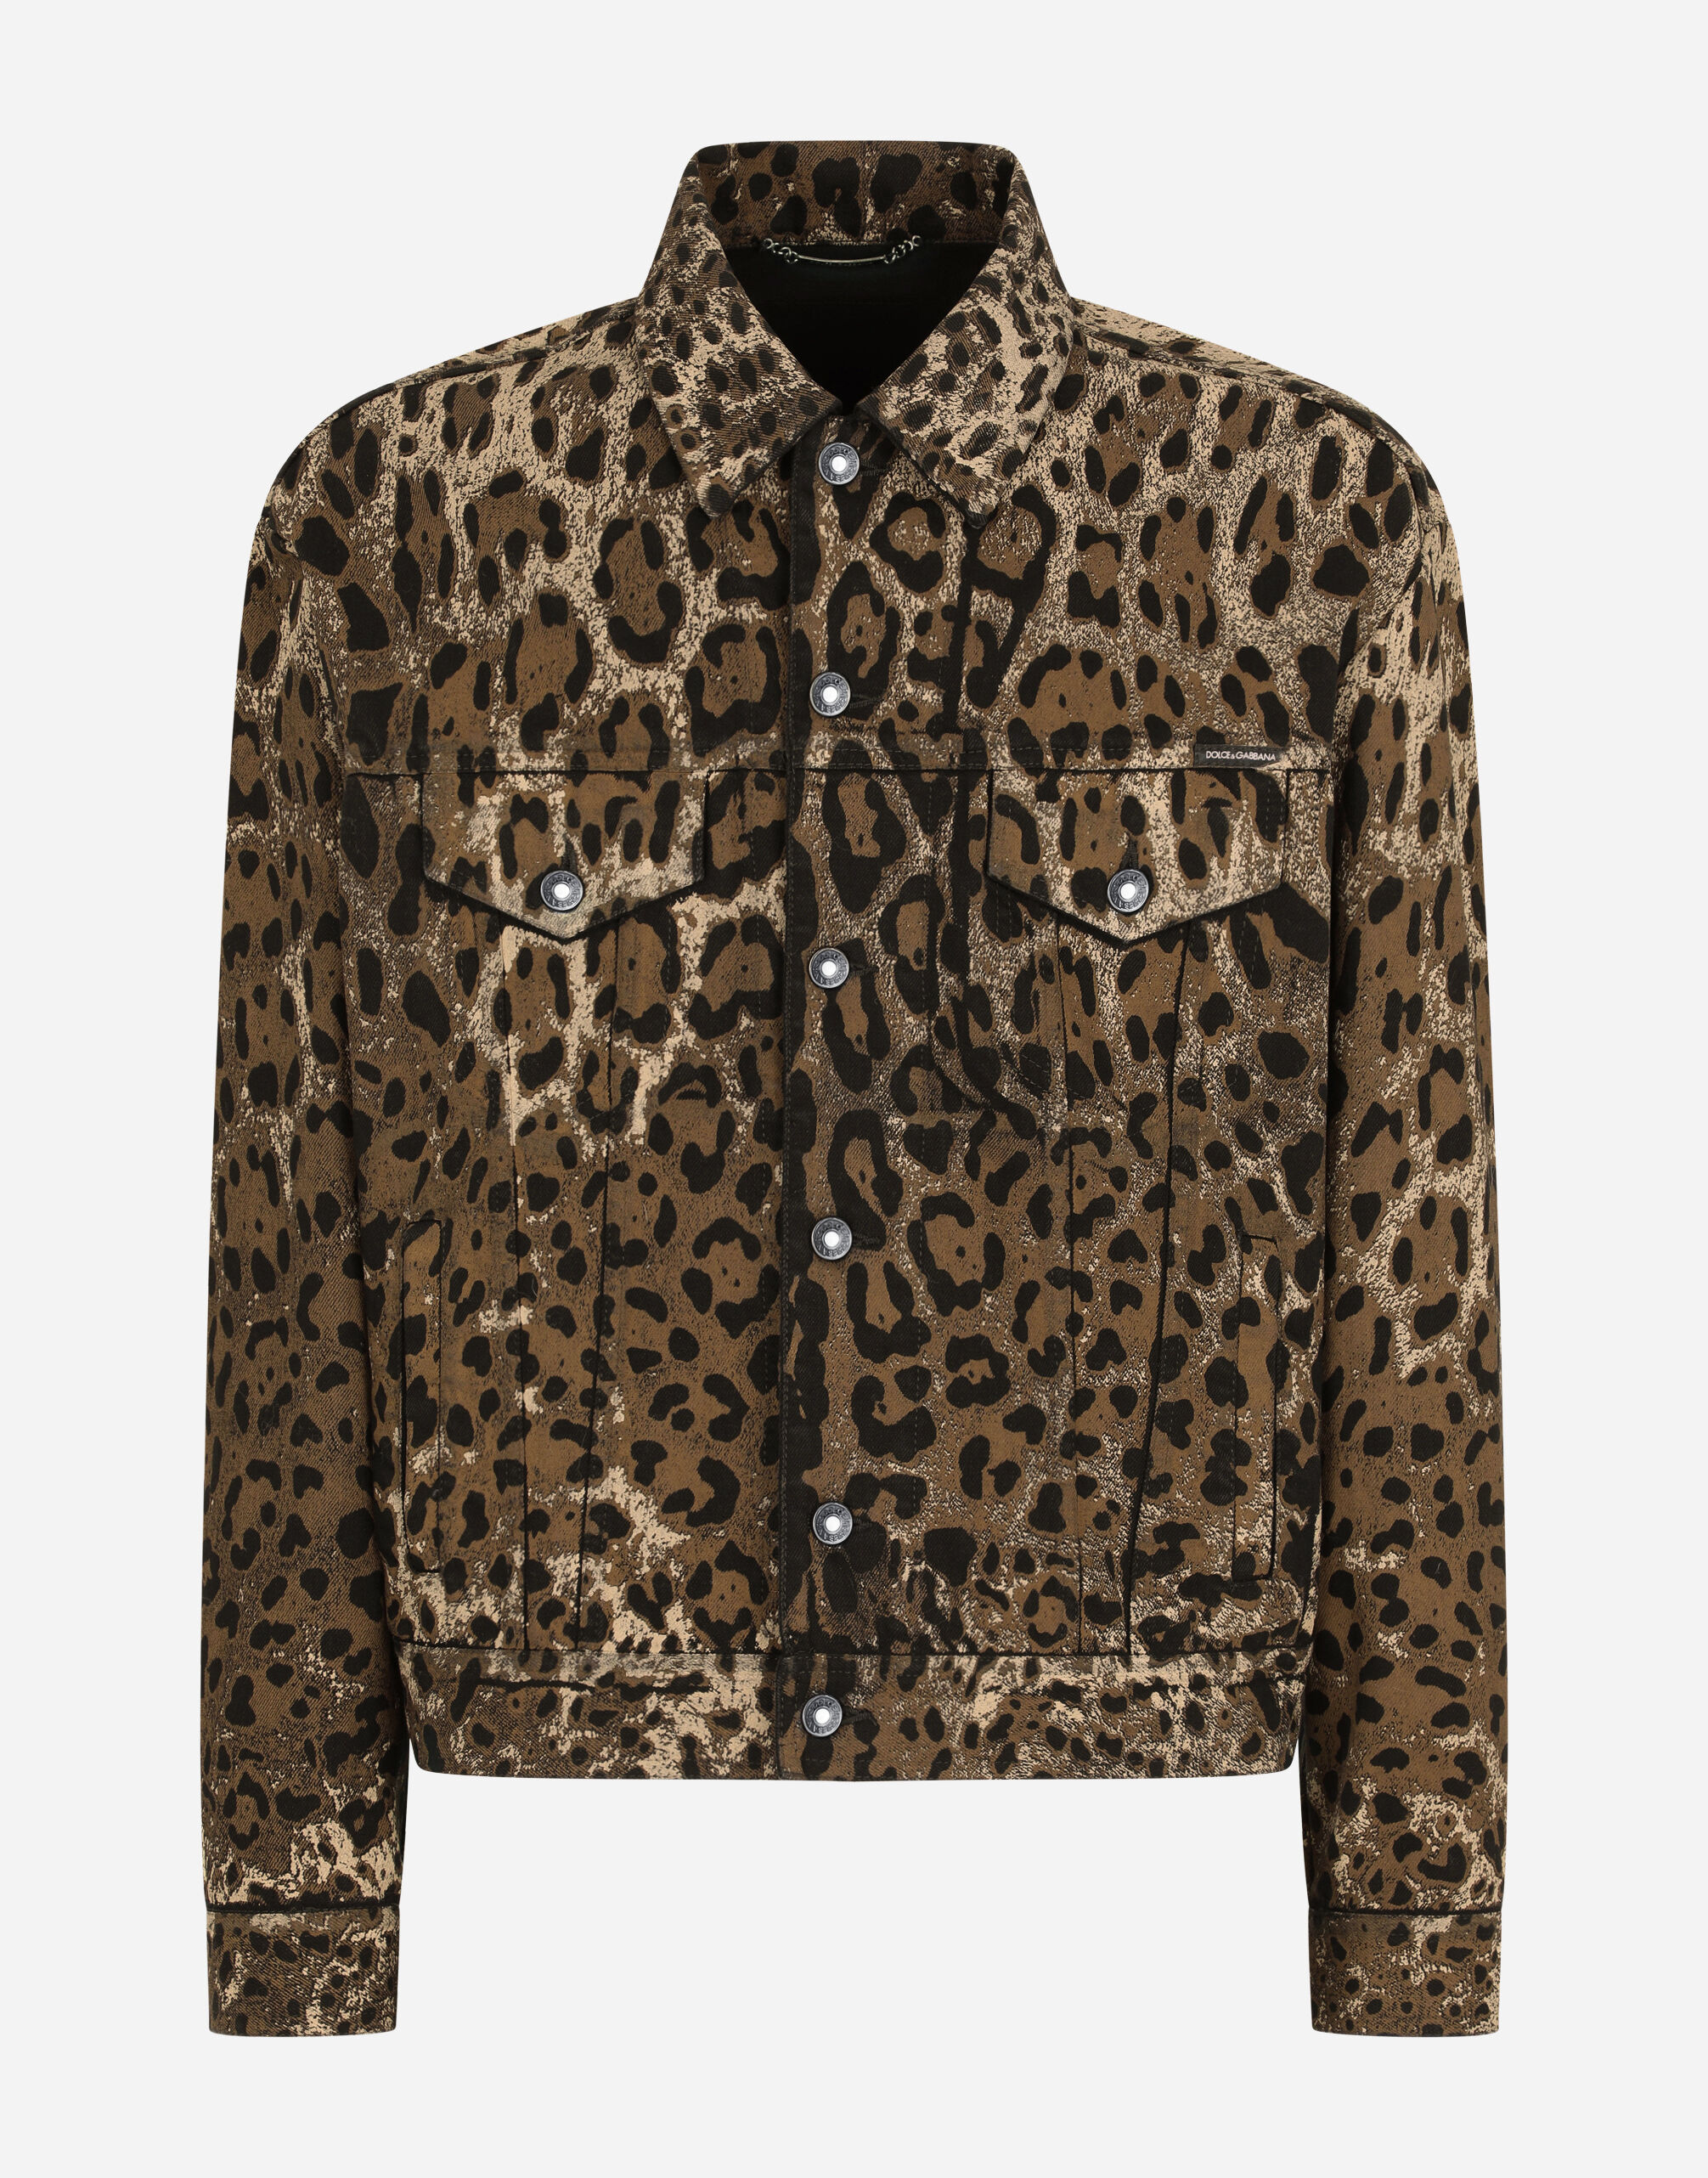 Leopard Print Denim Jacket from I Saw It First on 21 Buttons